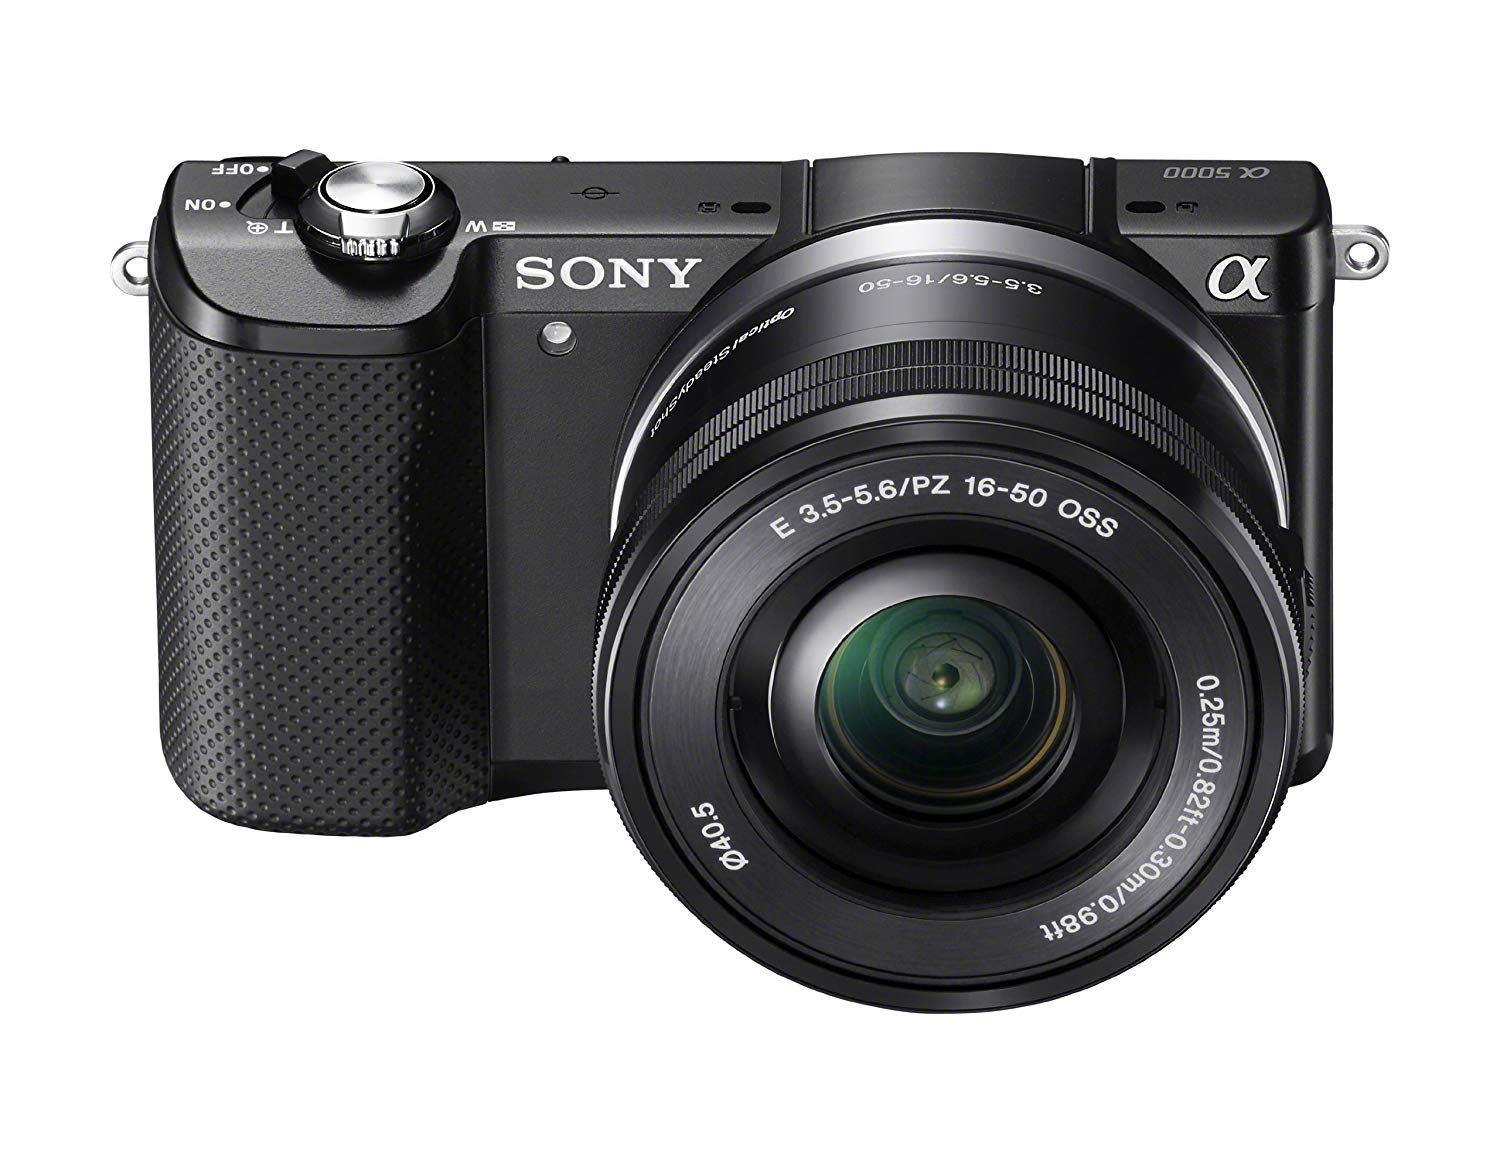 My Sony A5000 Mirrorless Camera Review – Real World and Lab